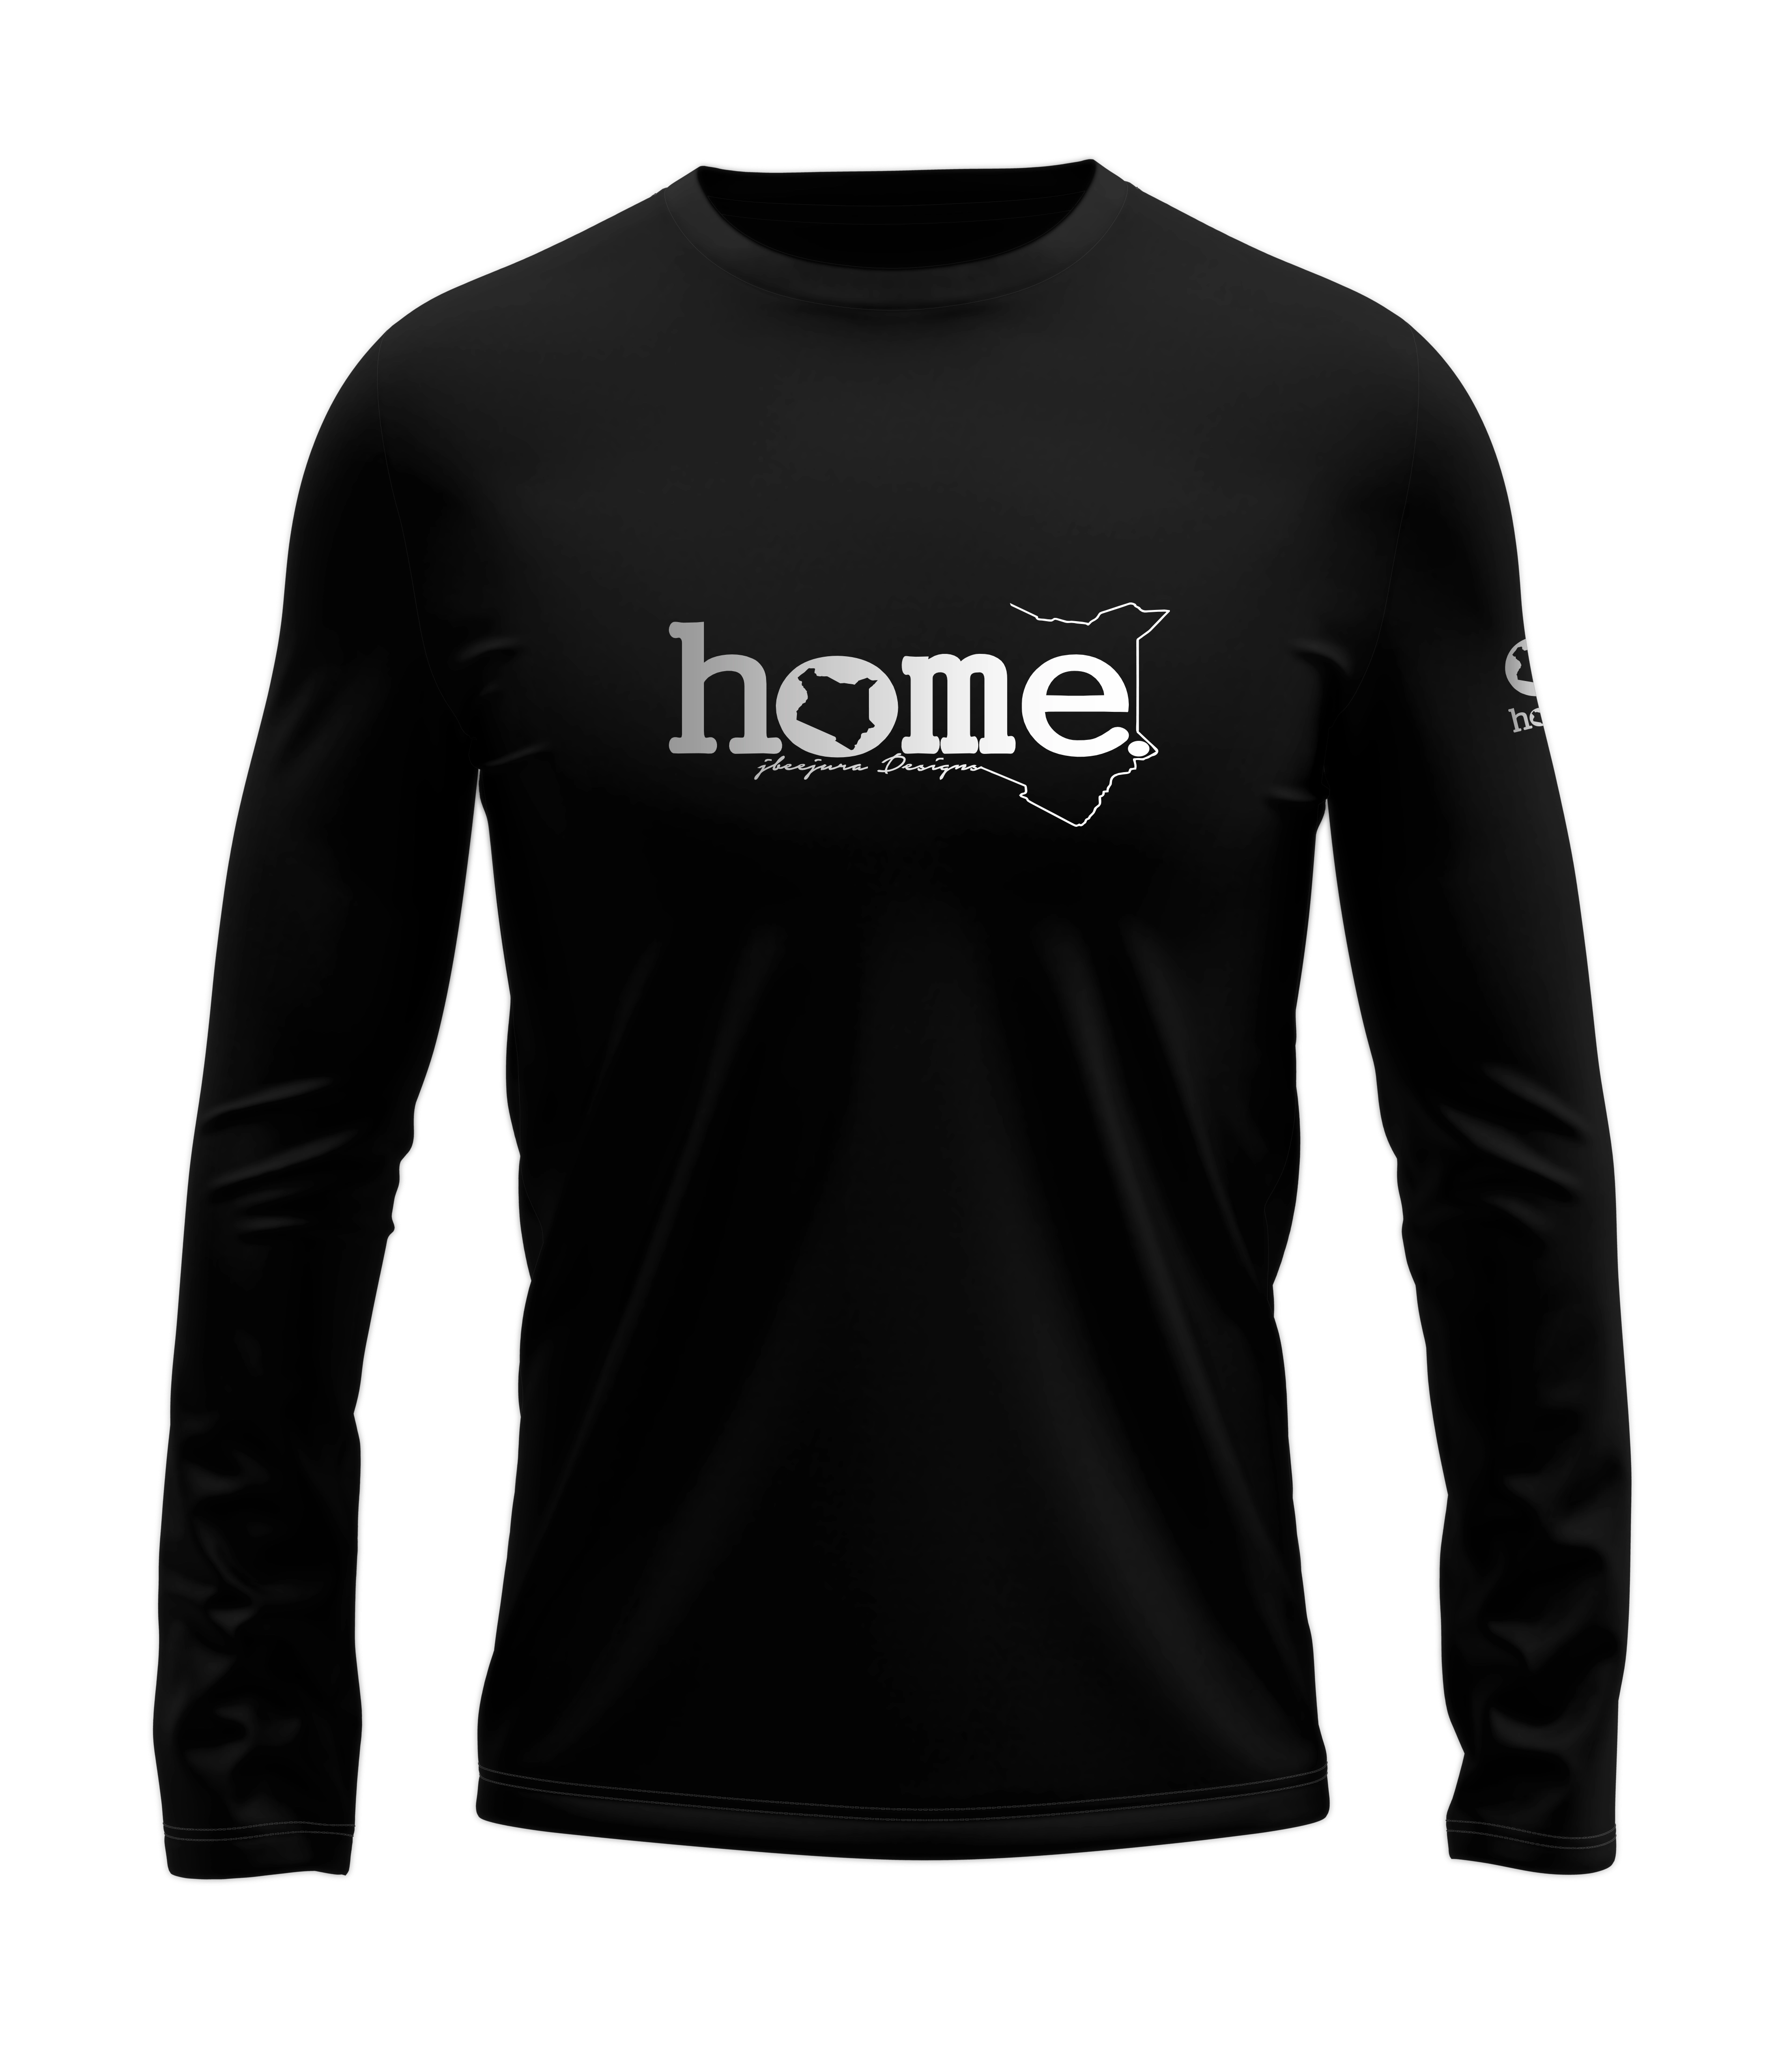 home_254 LONG-SLEEVED BLACK T-SHIRT WITH A SILVER CLASSIC WORDS PRINT – COTTON PLUS FABRIC